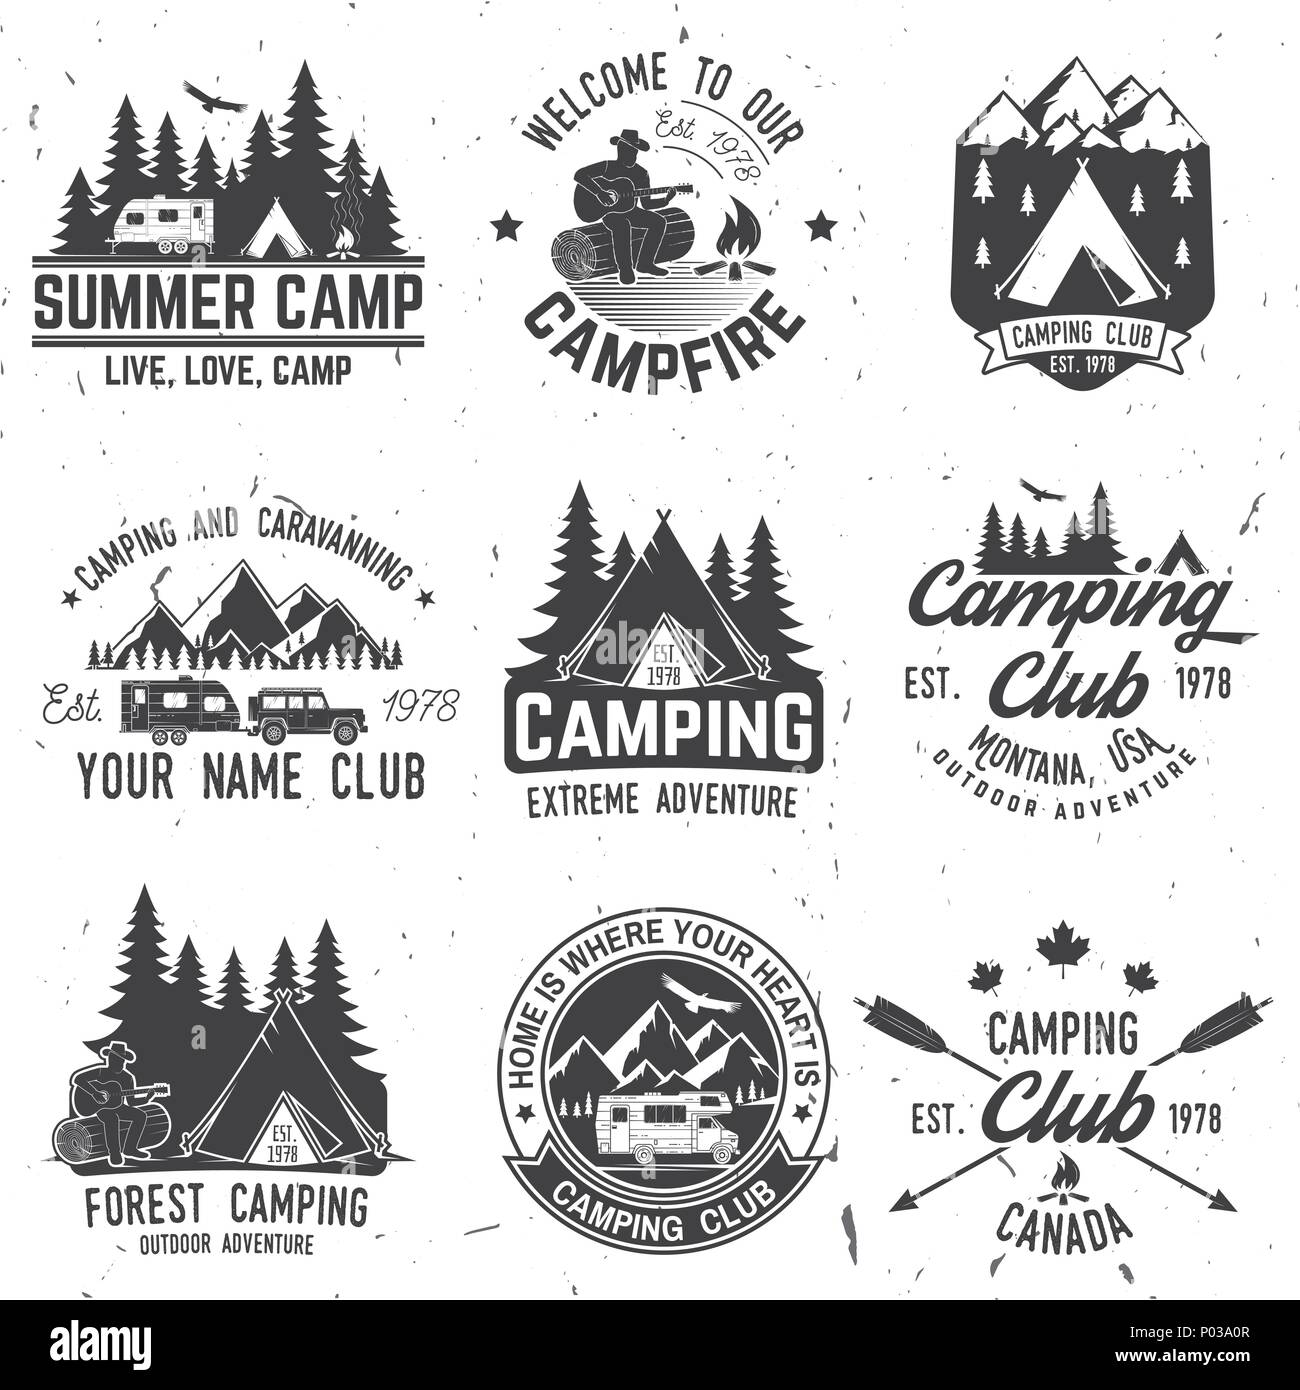 Camper and caravaning club. Vector illustration. Concept for shirt or logo, print, stamp or tee. Vintage typography design with Camper tent and forest Stock Vector